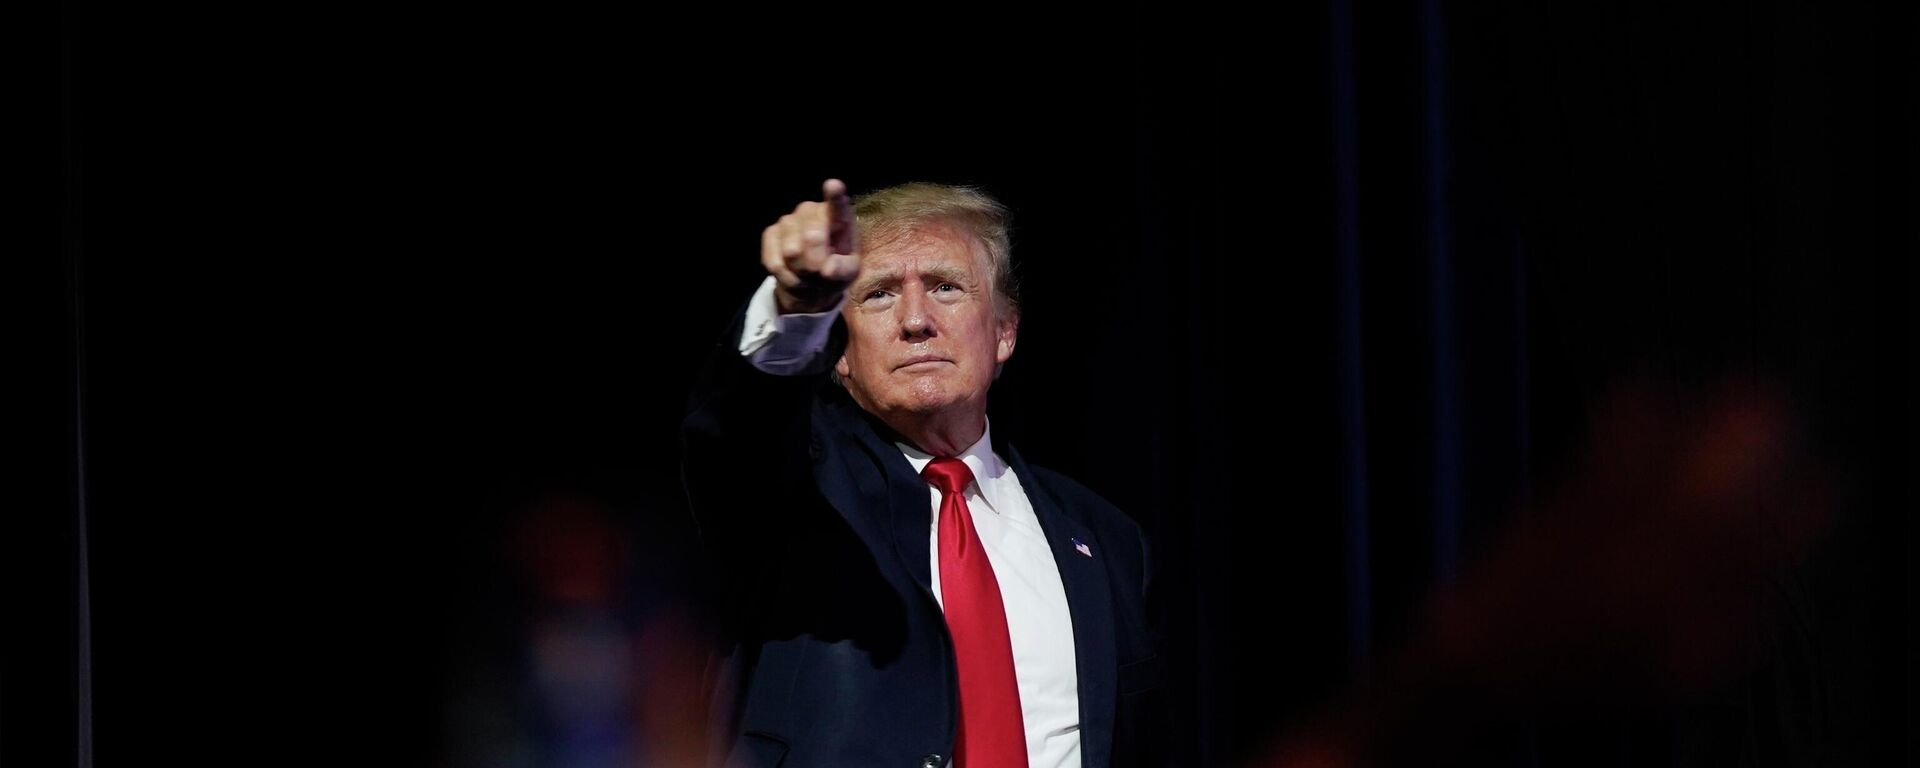 FILE - In this July 24, 2021, file photo, former President Donald Trump points to supporters after speaking at a Turning Point Action gathering, in Phoenix - Sputnik International, 1920, 07.01.2022